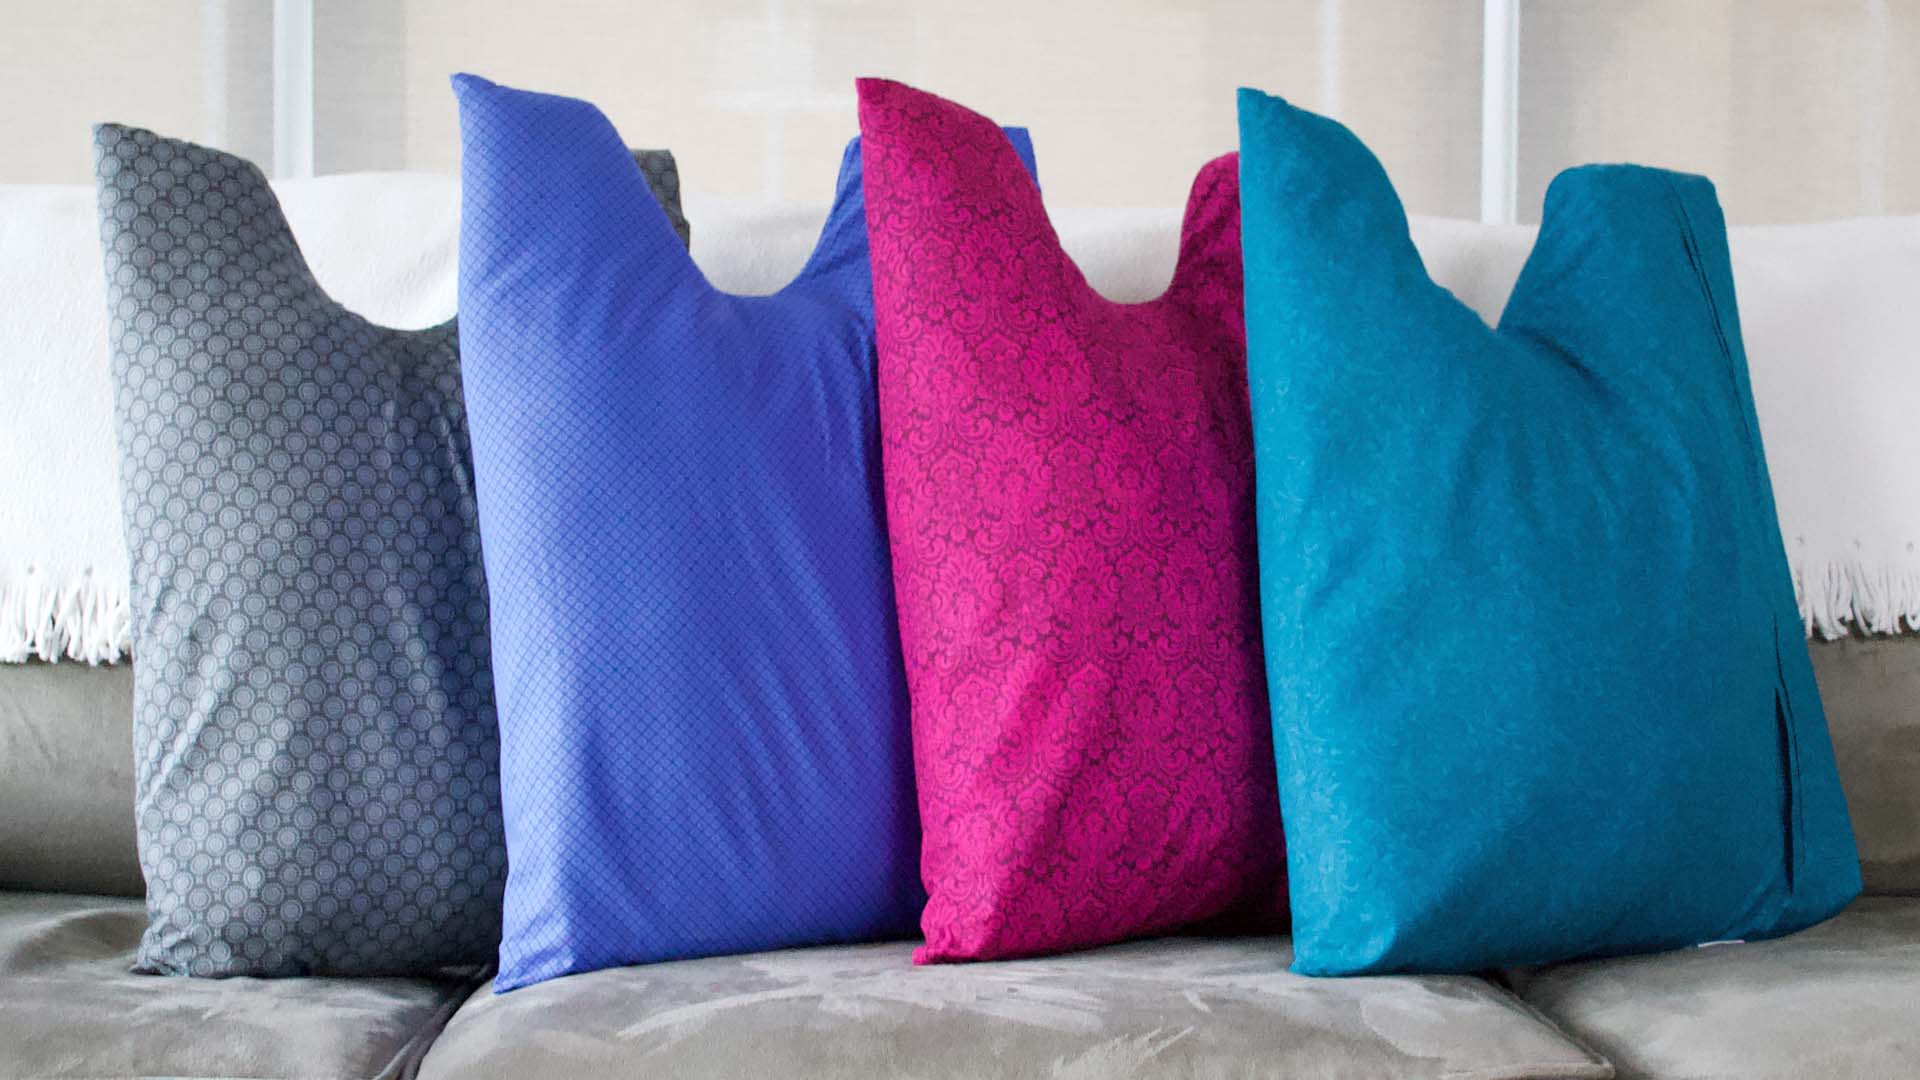 Surgery recovery pillows in gray, blue, pink and teal